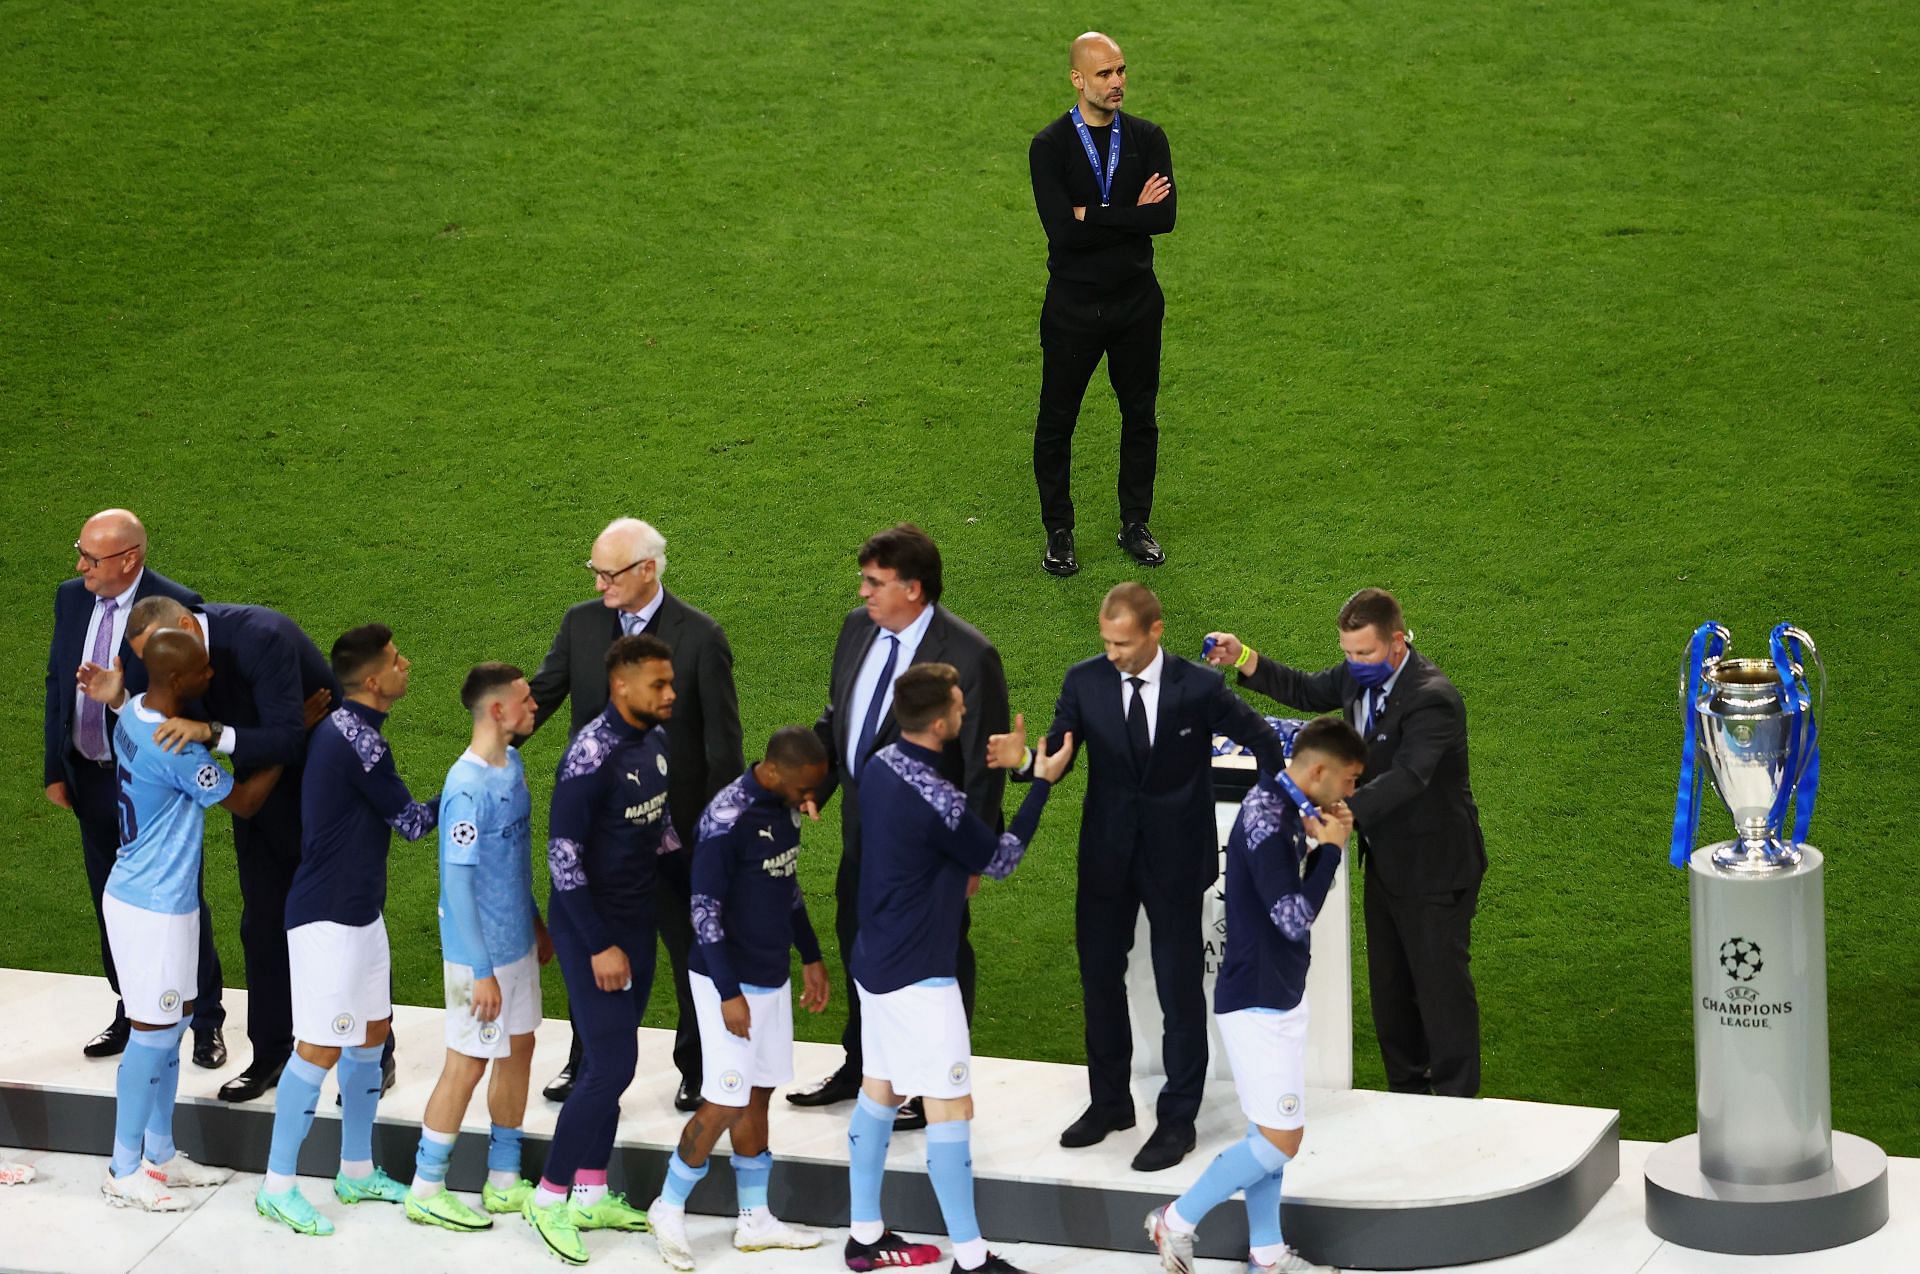 Manchester City had to settle for the runners-up position last year in Champions League